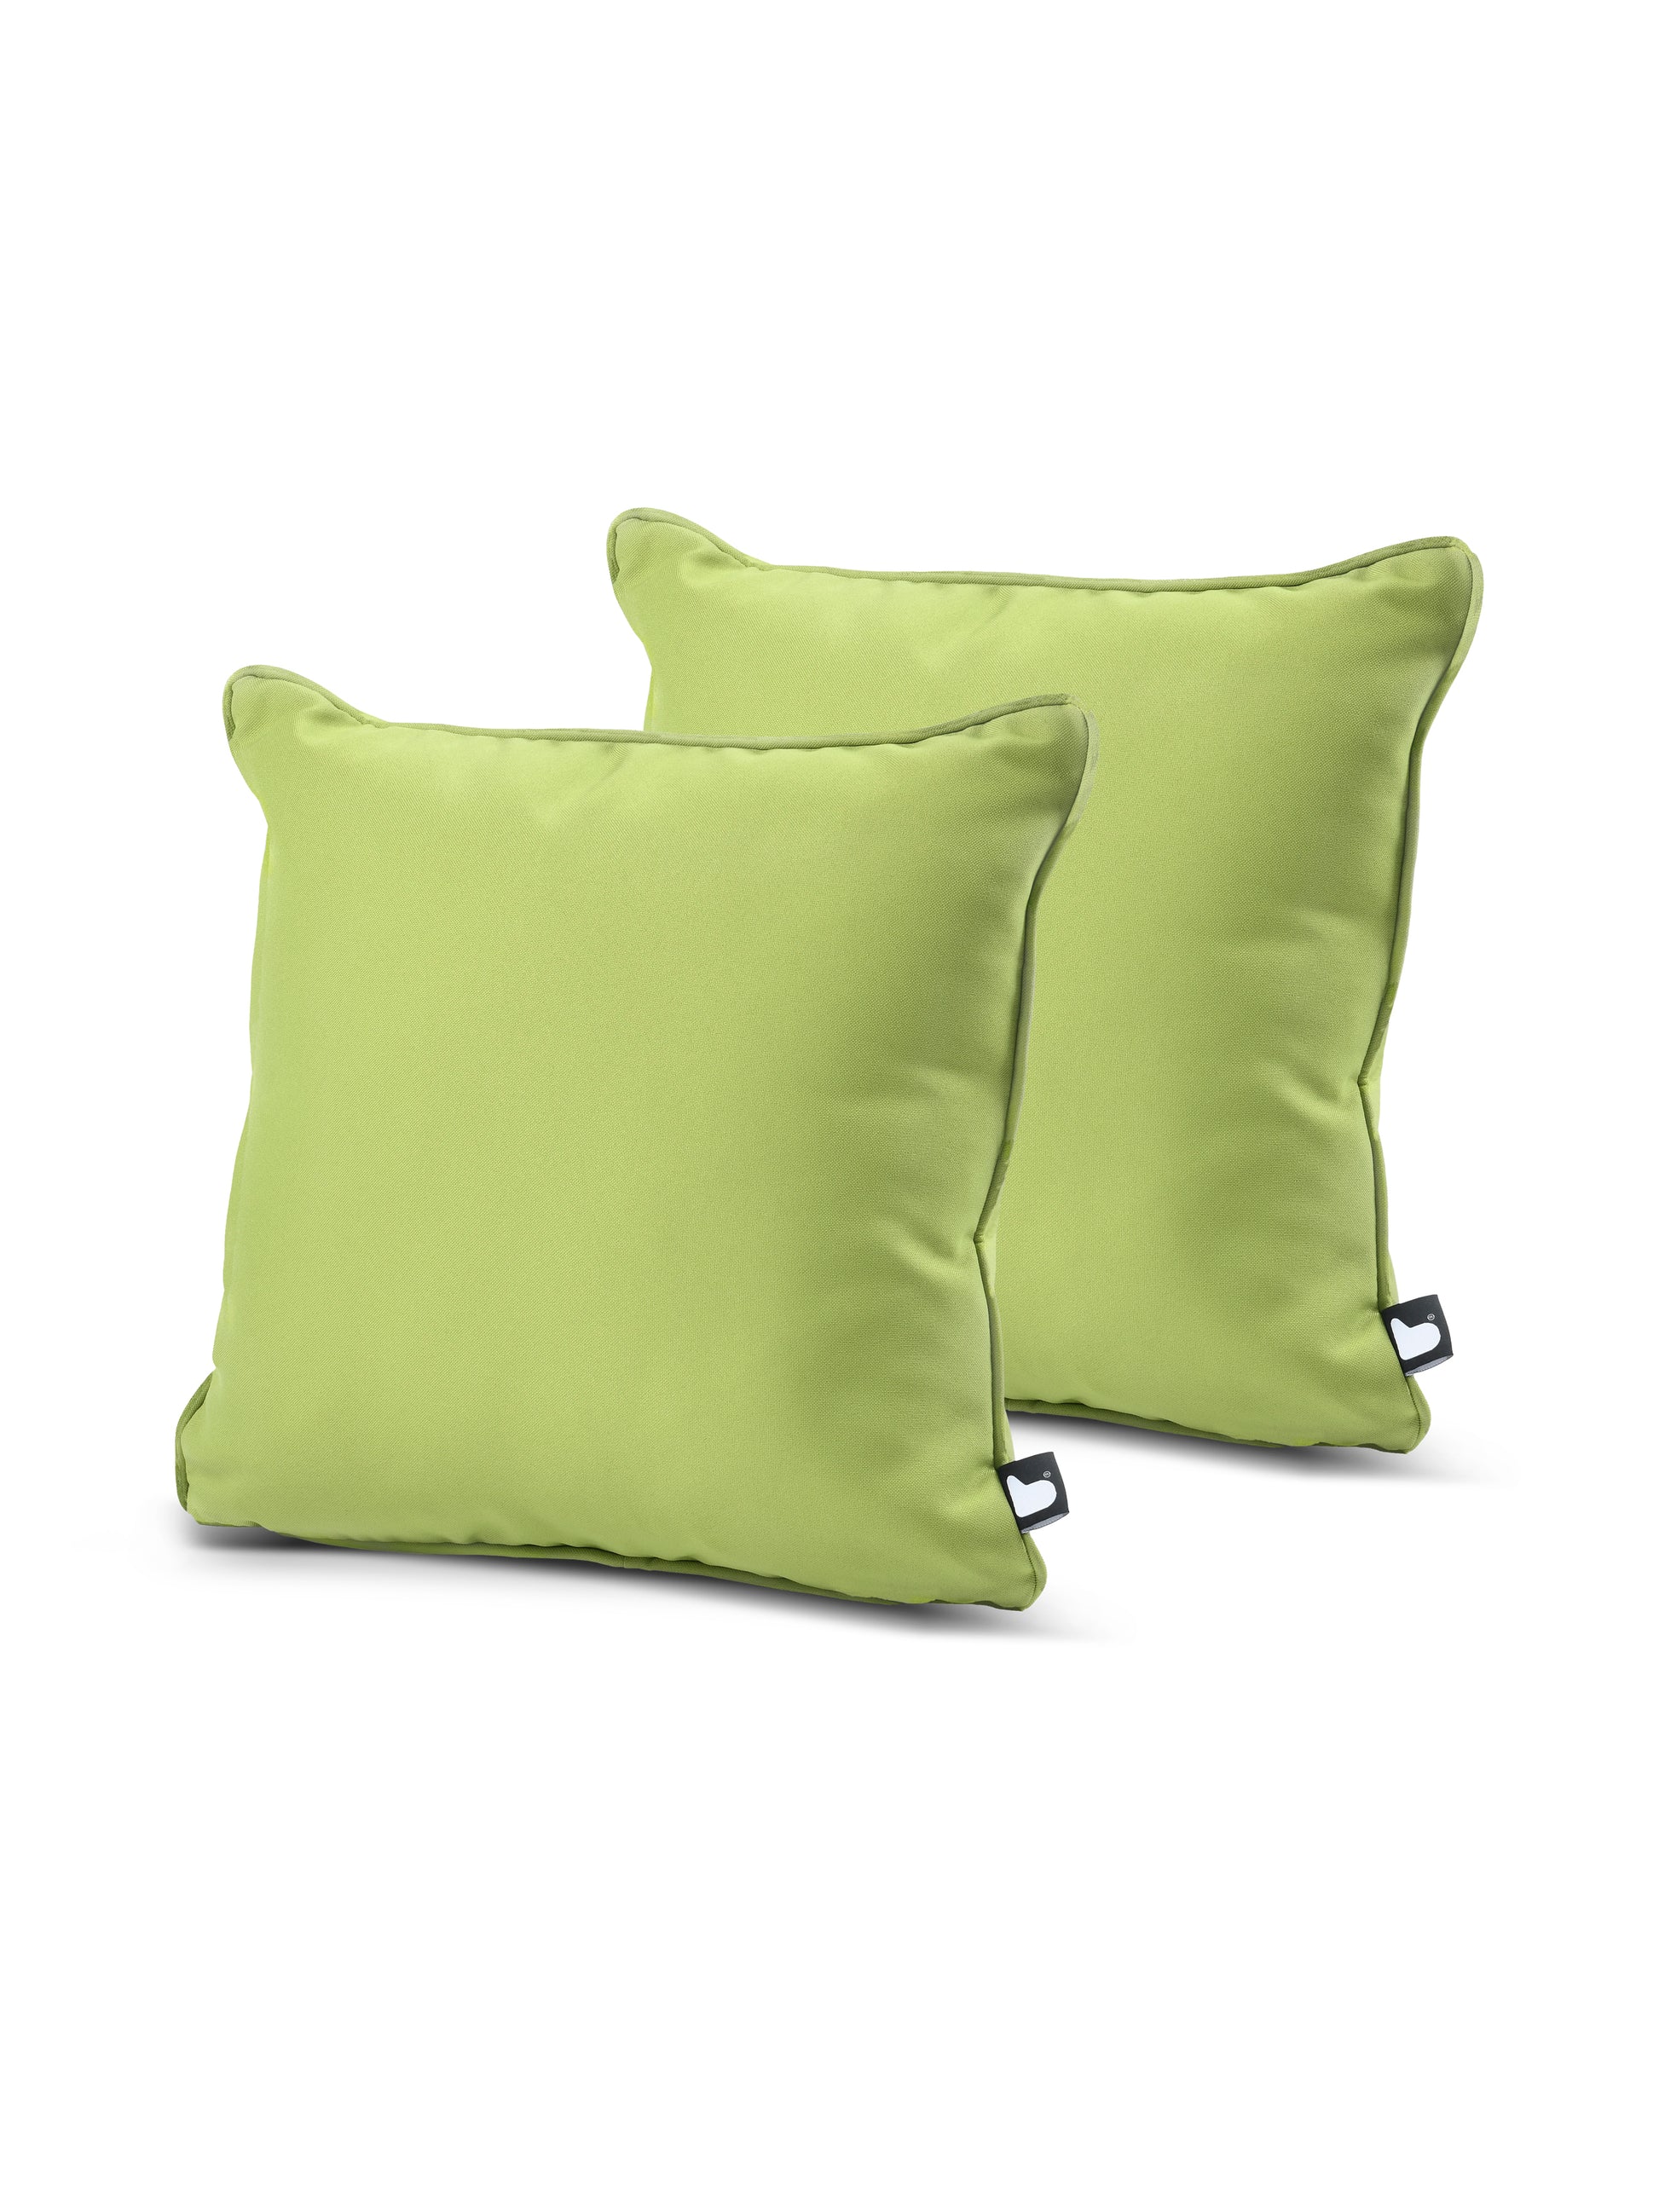 Two B Cushion Twin Pack Brights Collection by Brisks, made from breathable polyester, are pictured side by side against a white background. The pillows have slightly rounded corners and black tags on one edge. Their vibrant color and soft appearance suggest comfort and style for home decor.